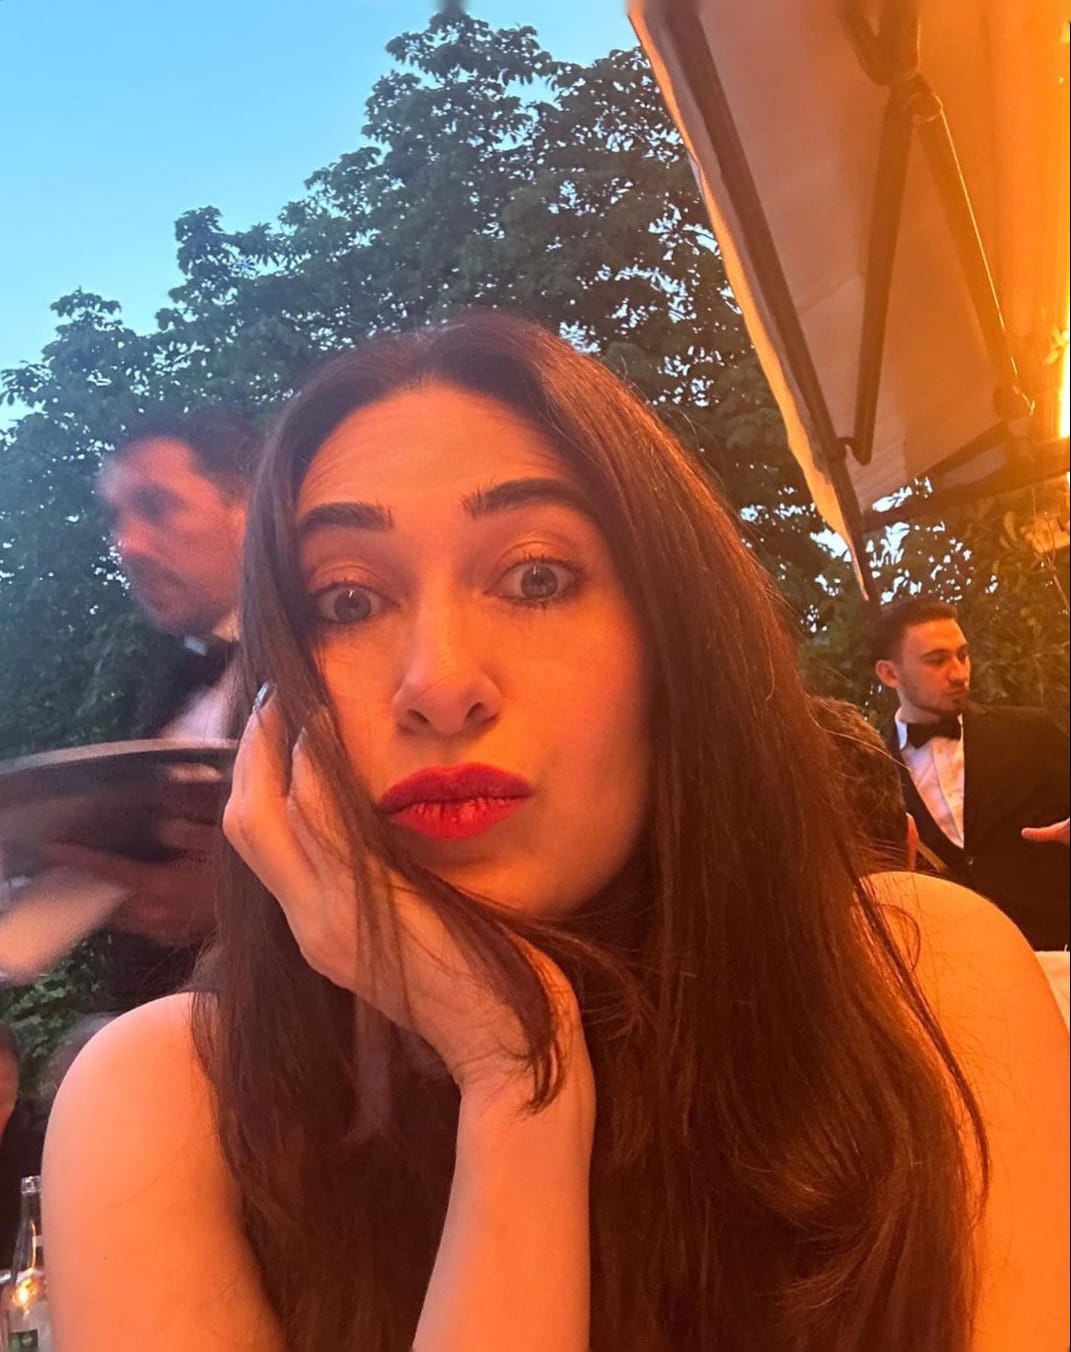 The married life of actress Karisma Kapoor was difficult